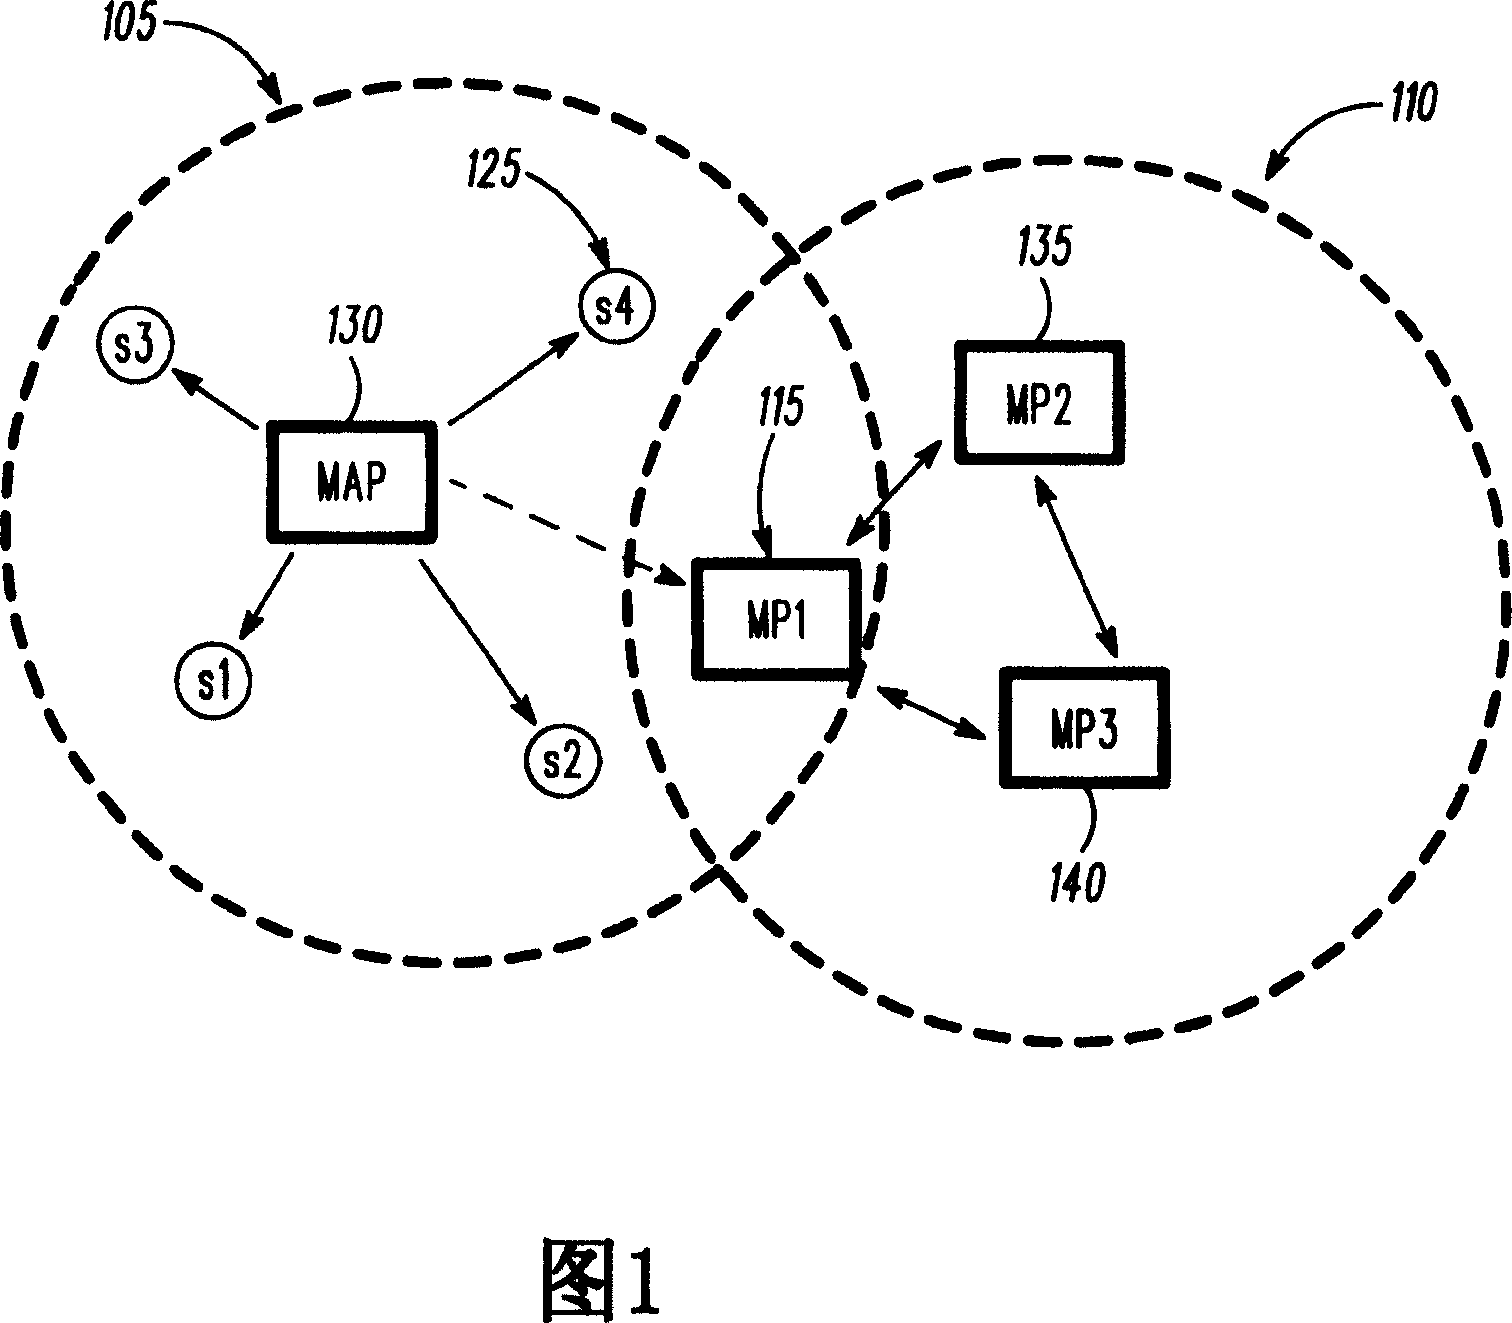 Timing synchronization of mesh points in a wireless communication network